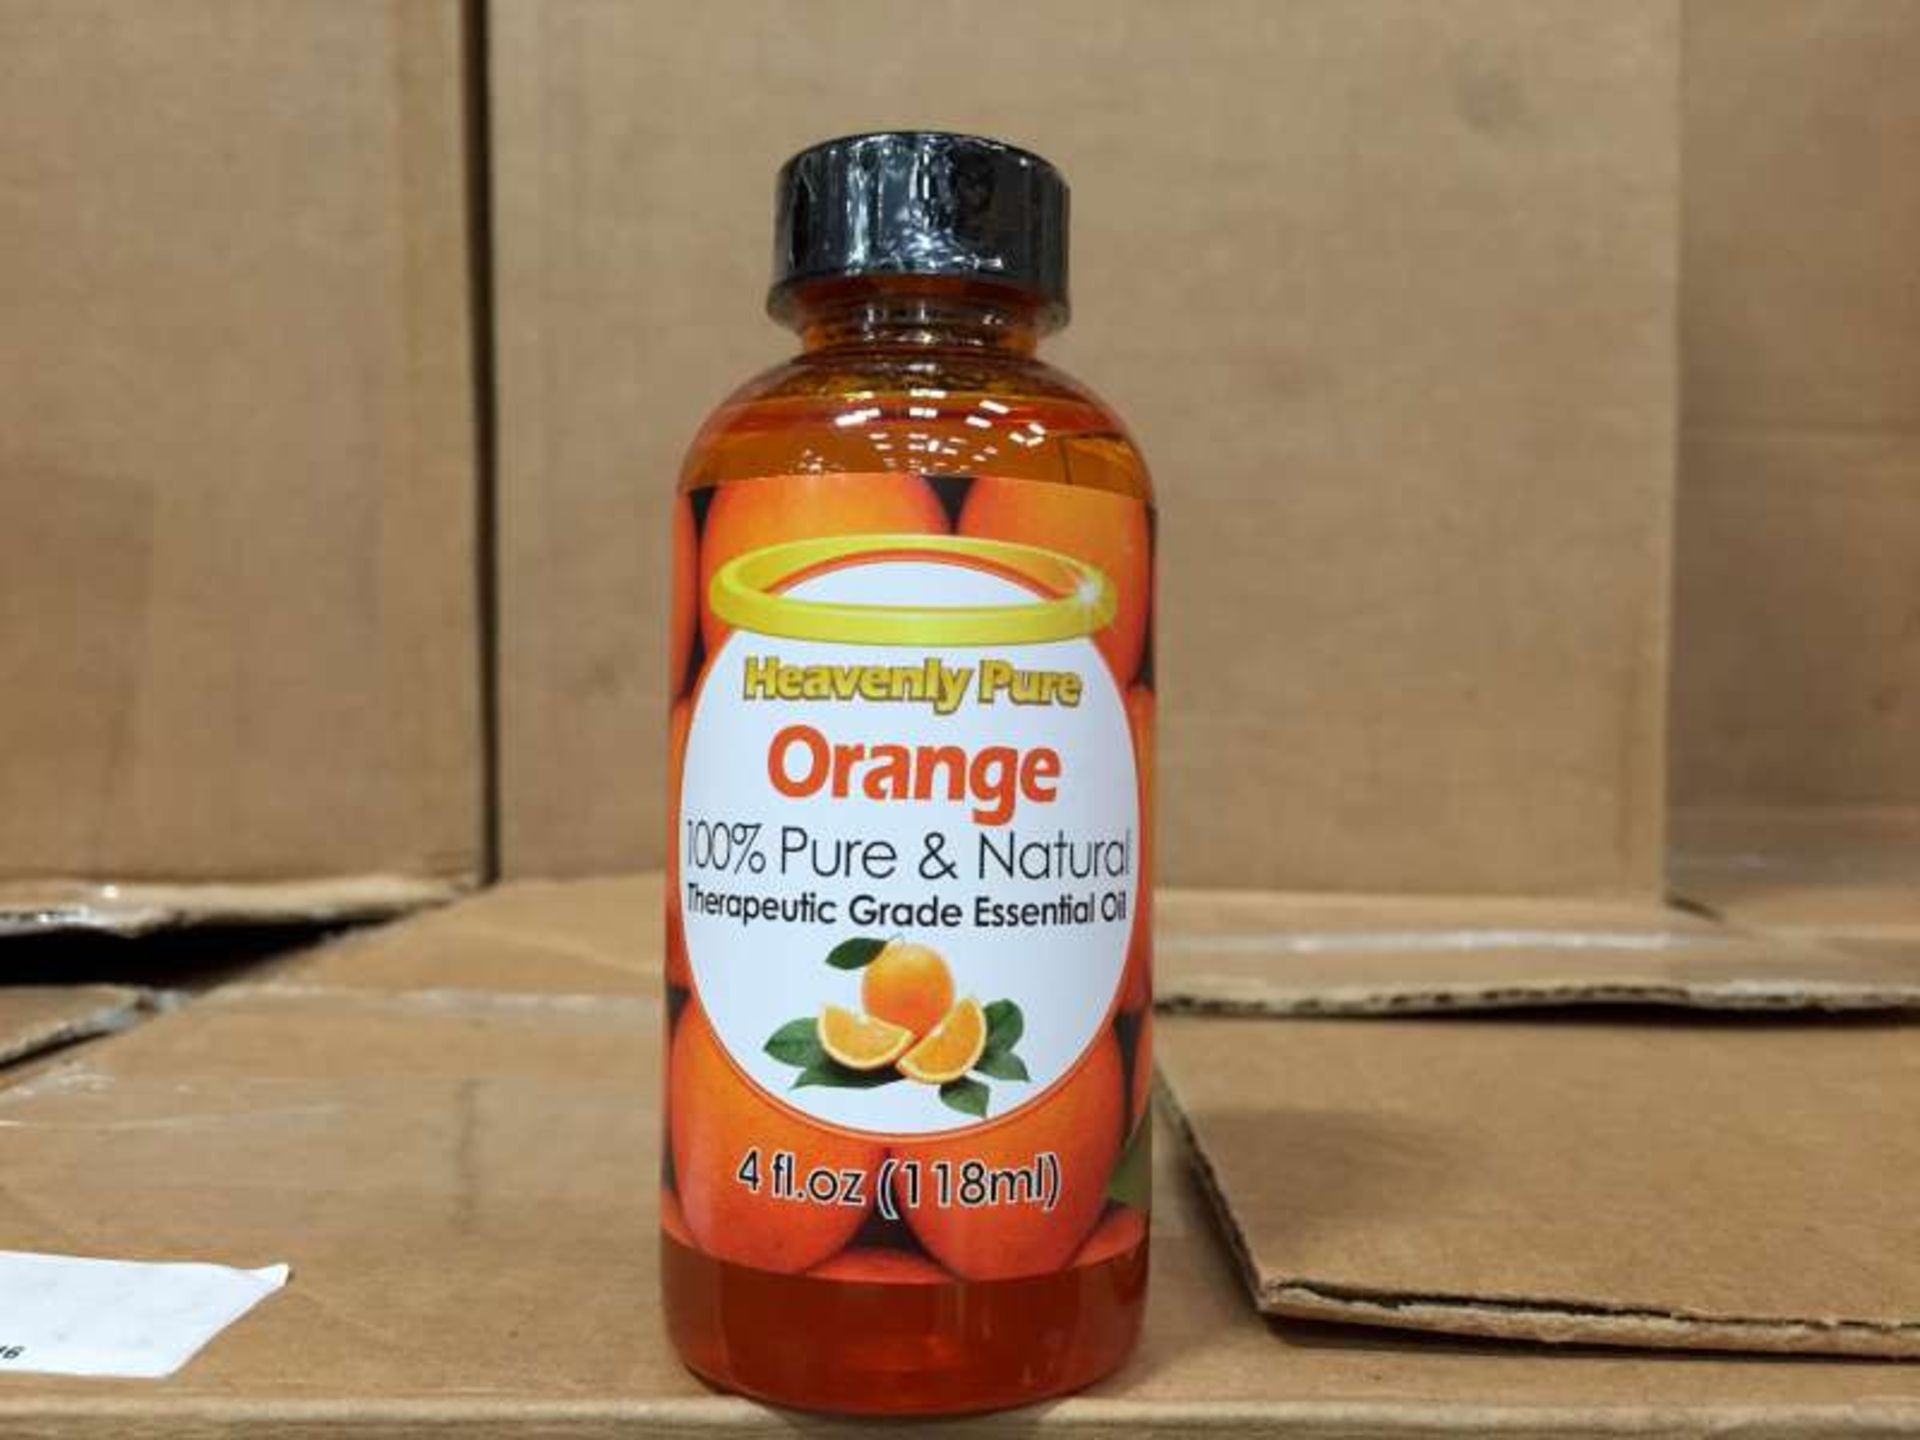 50 X 118 ML BOTTLES OF HEAVENLY PURE ORANGE 100% PURE AND NATURAL THERAPEUTIC GRADE ESSENTIAL OIL IN